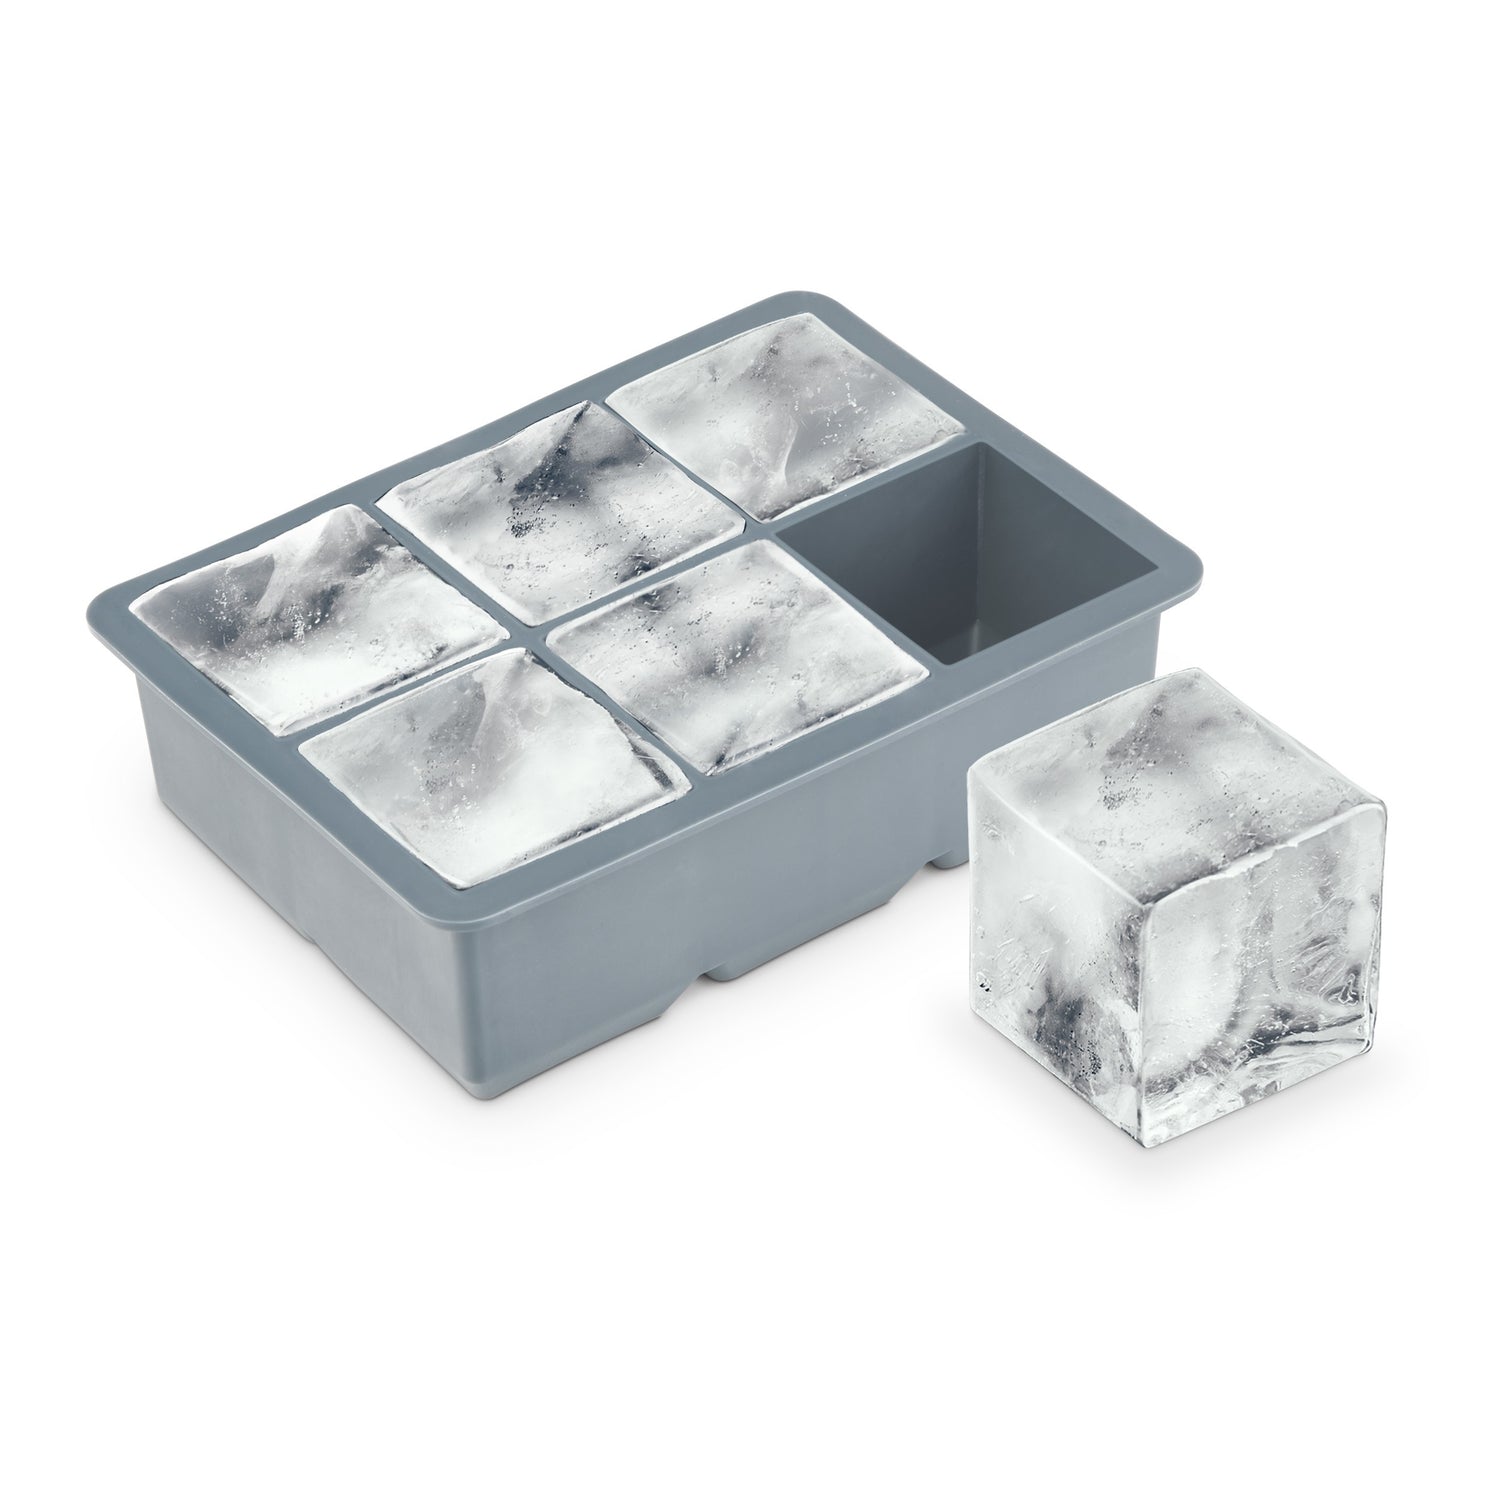 2" Extra-Large 6 Cube Ice Mould